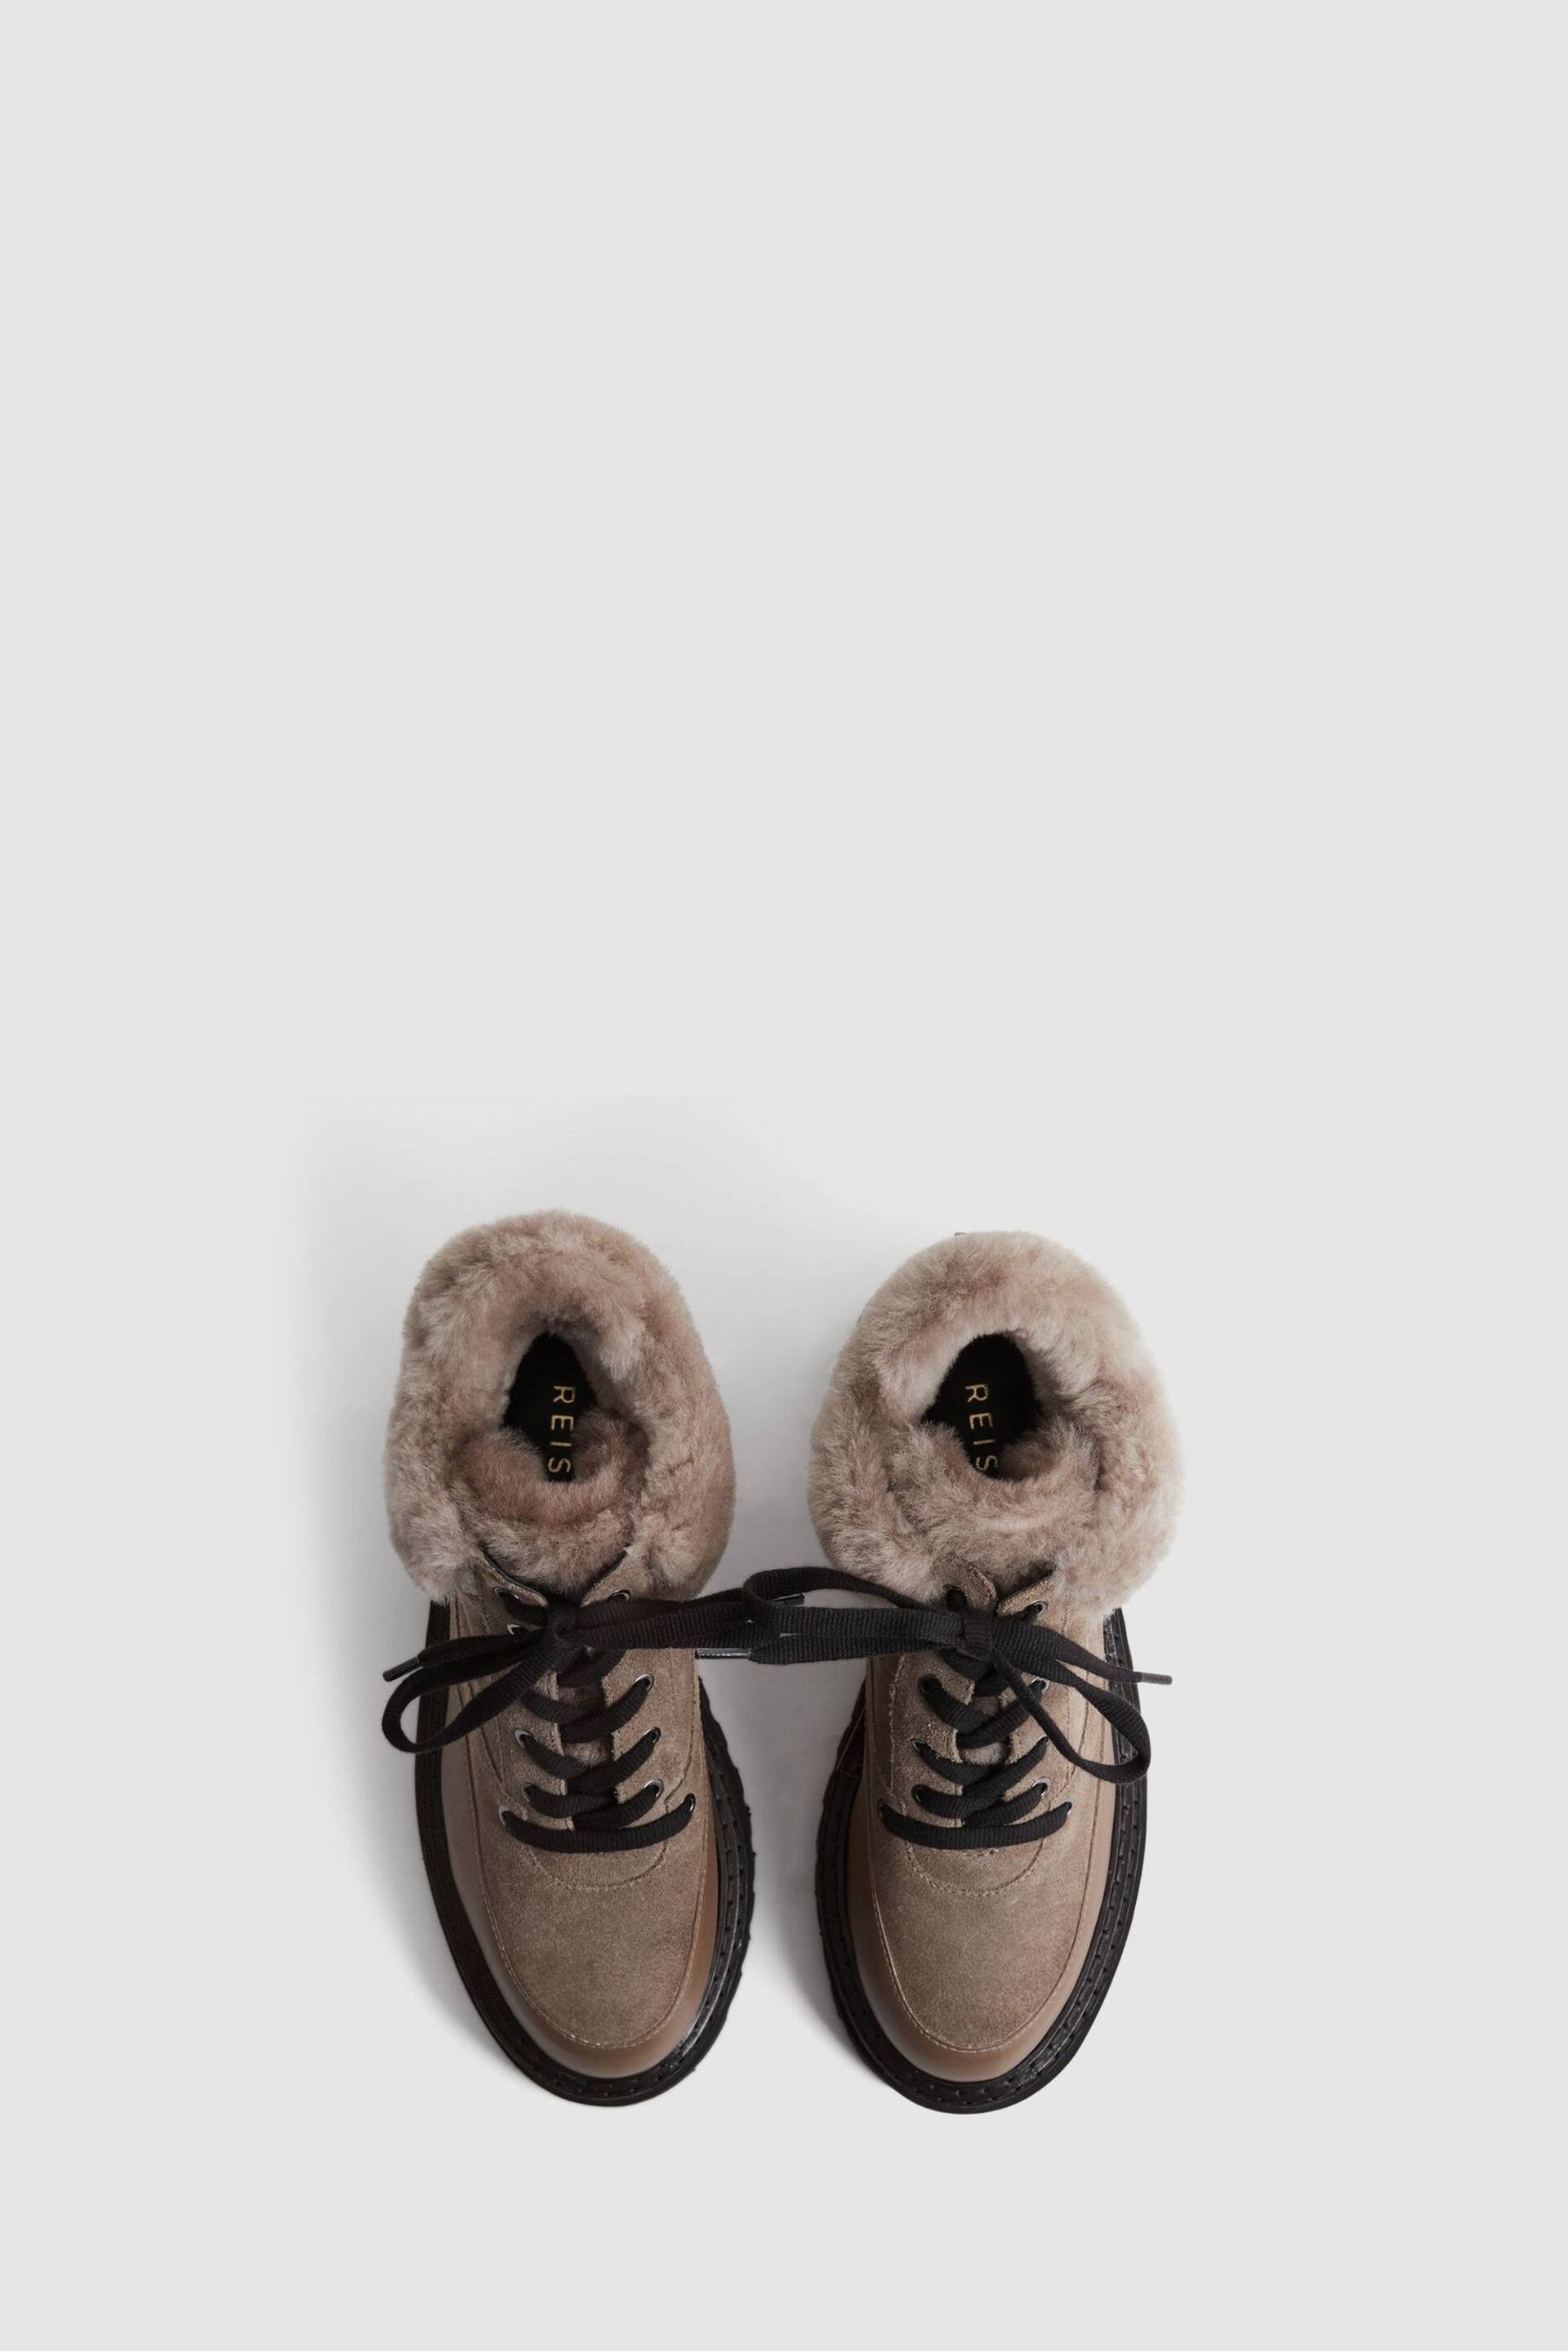 Reiss Mink Leonie Suede Faux Fur Hiking Boots - Image 3 of 5